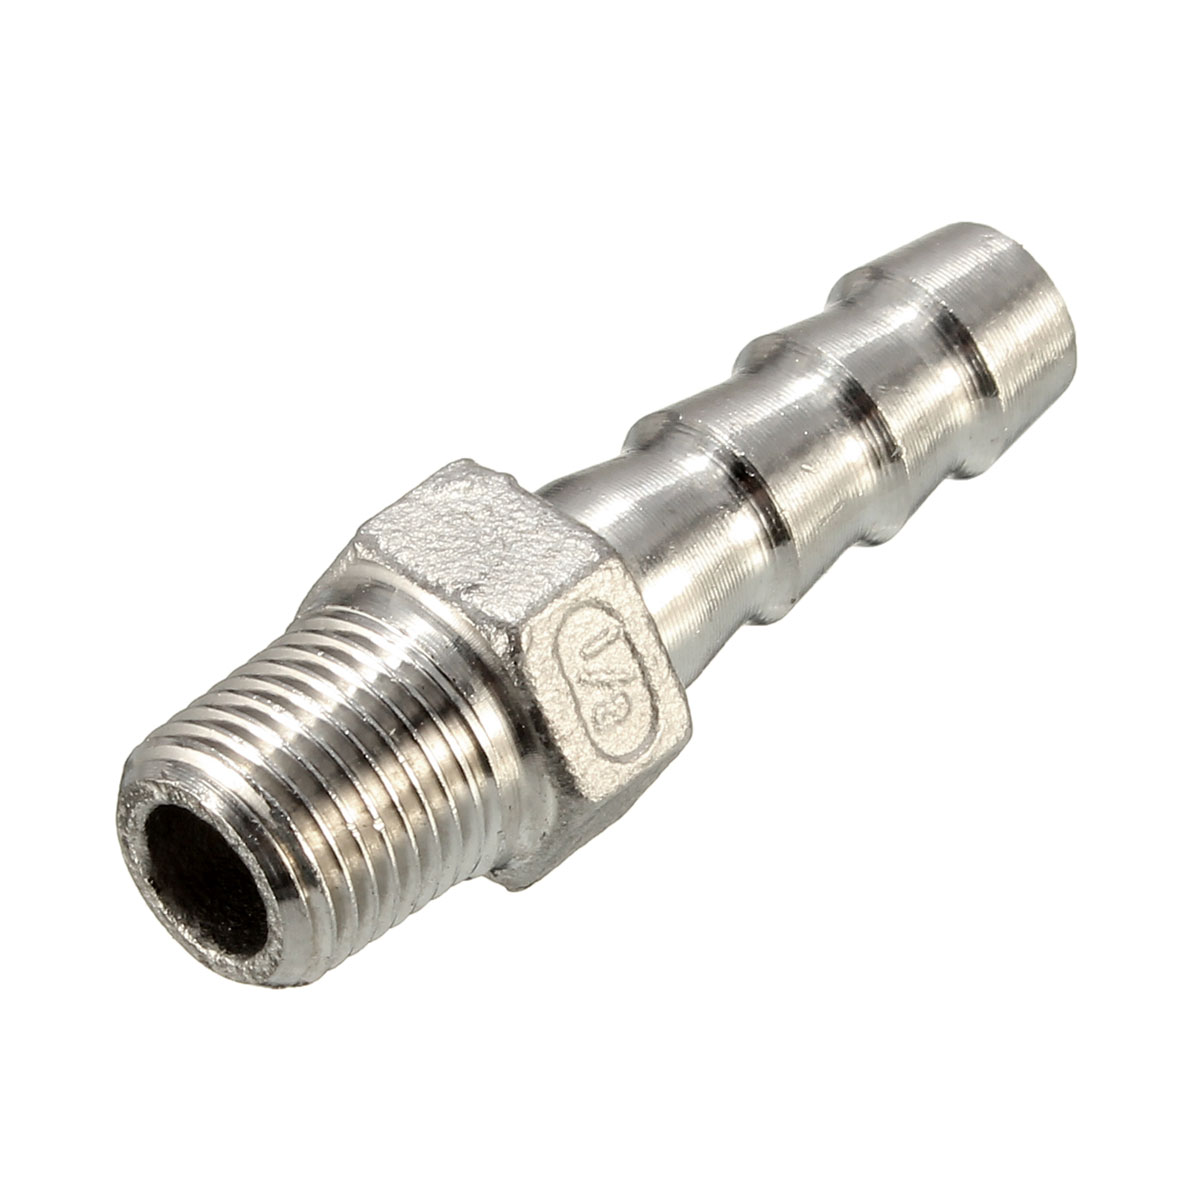 18-Inch-Stainless-Steel-Hose-Tails-Barb-Connector-BSPT-Thread-Pipe-Adapter-1716150-5